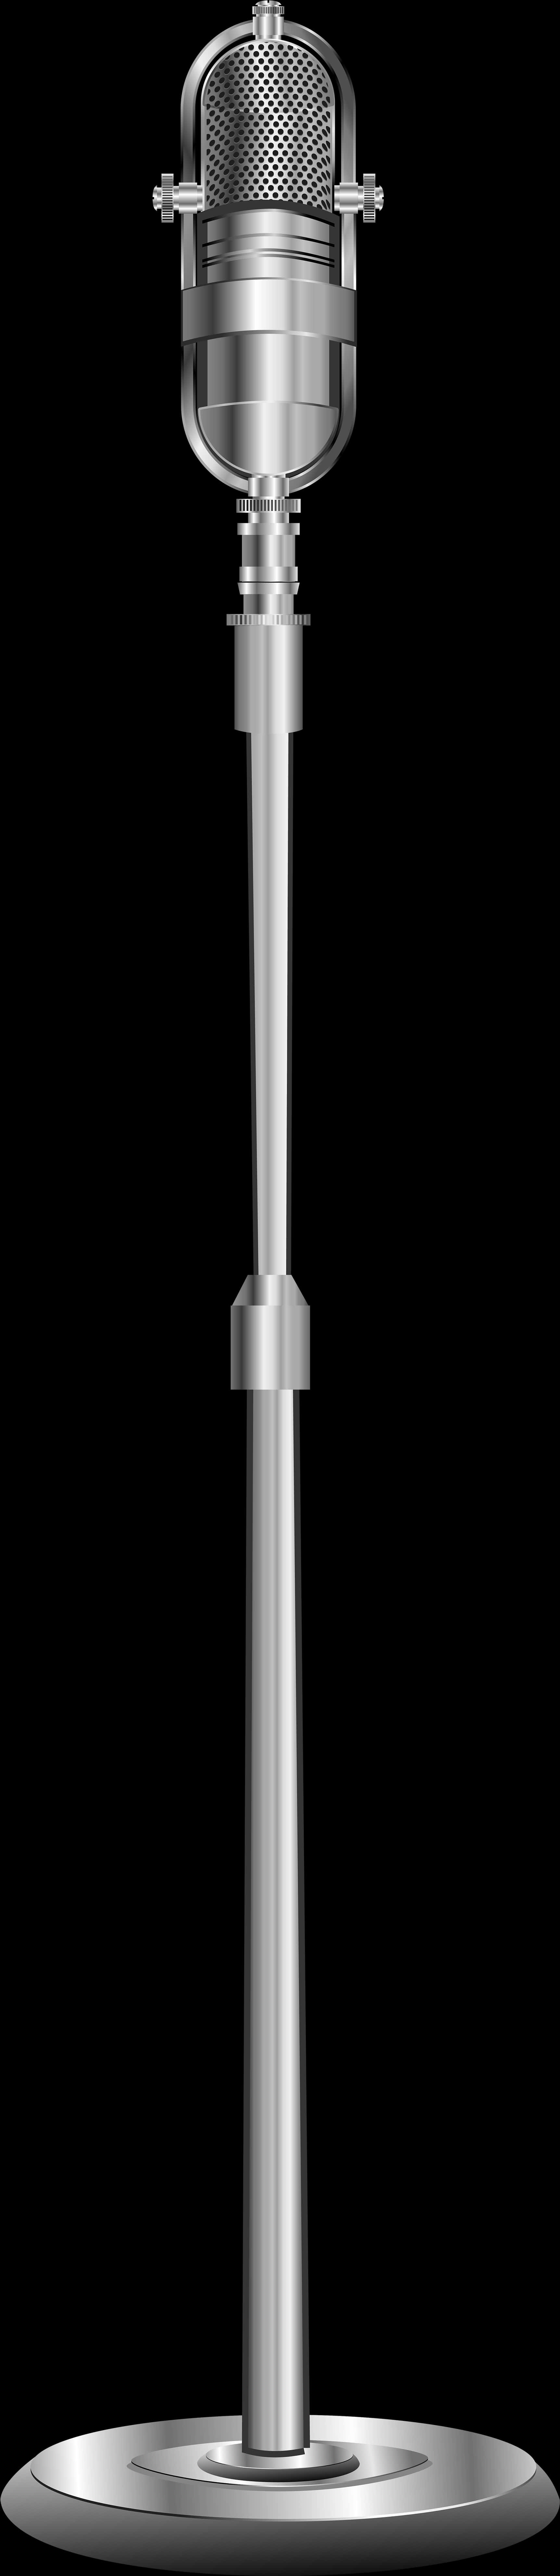 Vintage Microphone Standing Tall PNG image